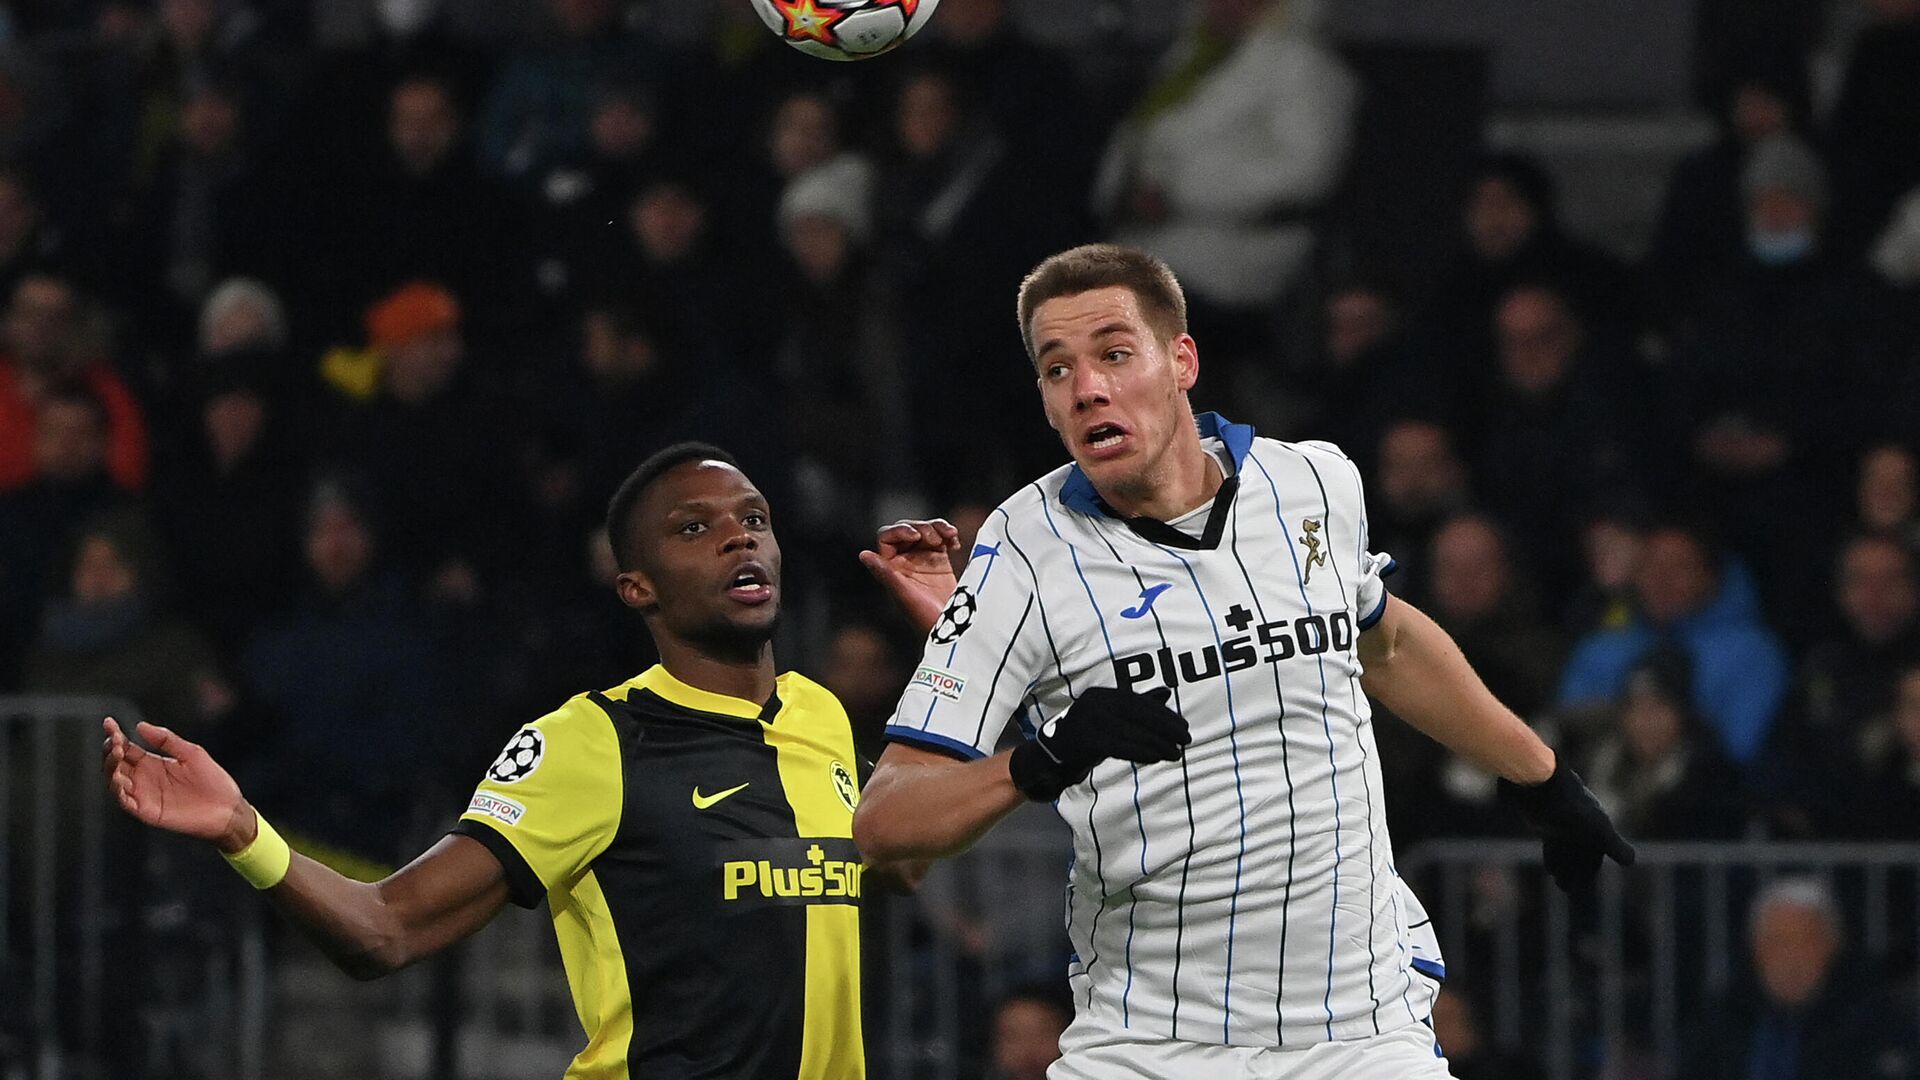 Atalanta's Croatian midfielder Mario Pasalic (R) heads the ball past Young Boys' Luxembourgish midfielder Christopher Martins during the UEFA Champions League group F football match between BSC Young Boys and Atalanta BC at Stadion Wankdorf in Bern on November 23, 2021. (Photo by Fabrice COFFRINI / AFP) - РИА Новости, 1920, 30.01.2022